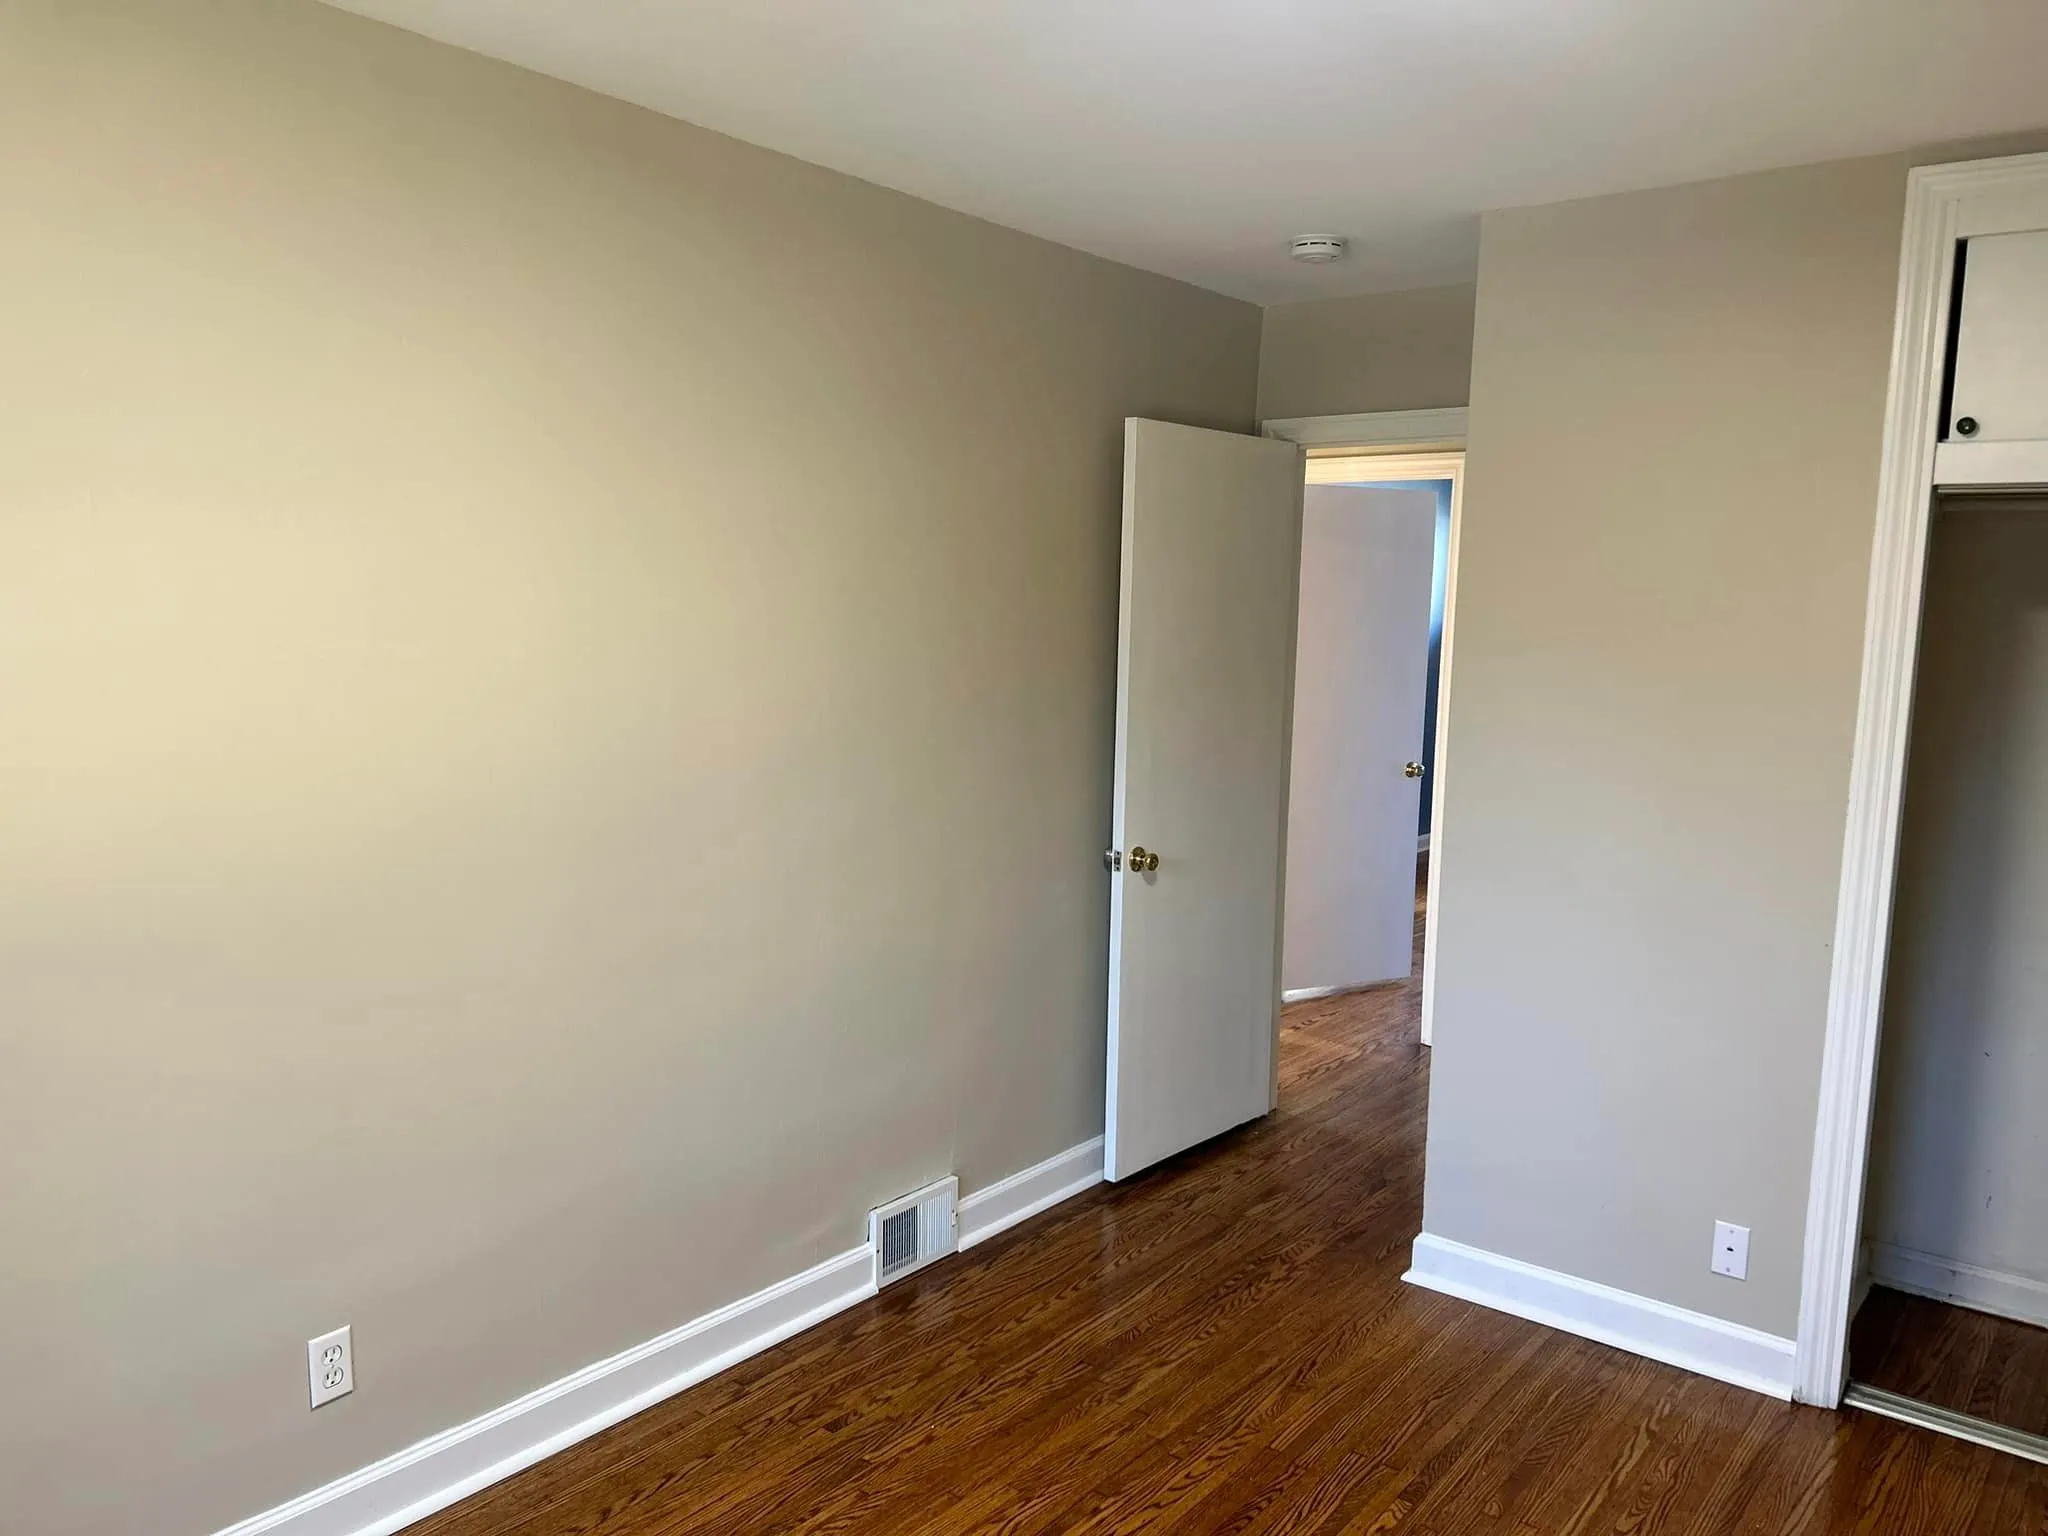 Commercial Painting for Sanders Painting LLC in Brooklawn , NJ